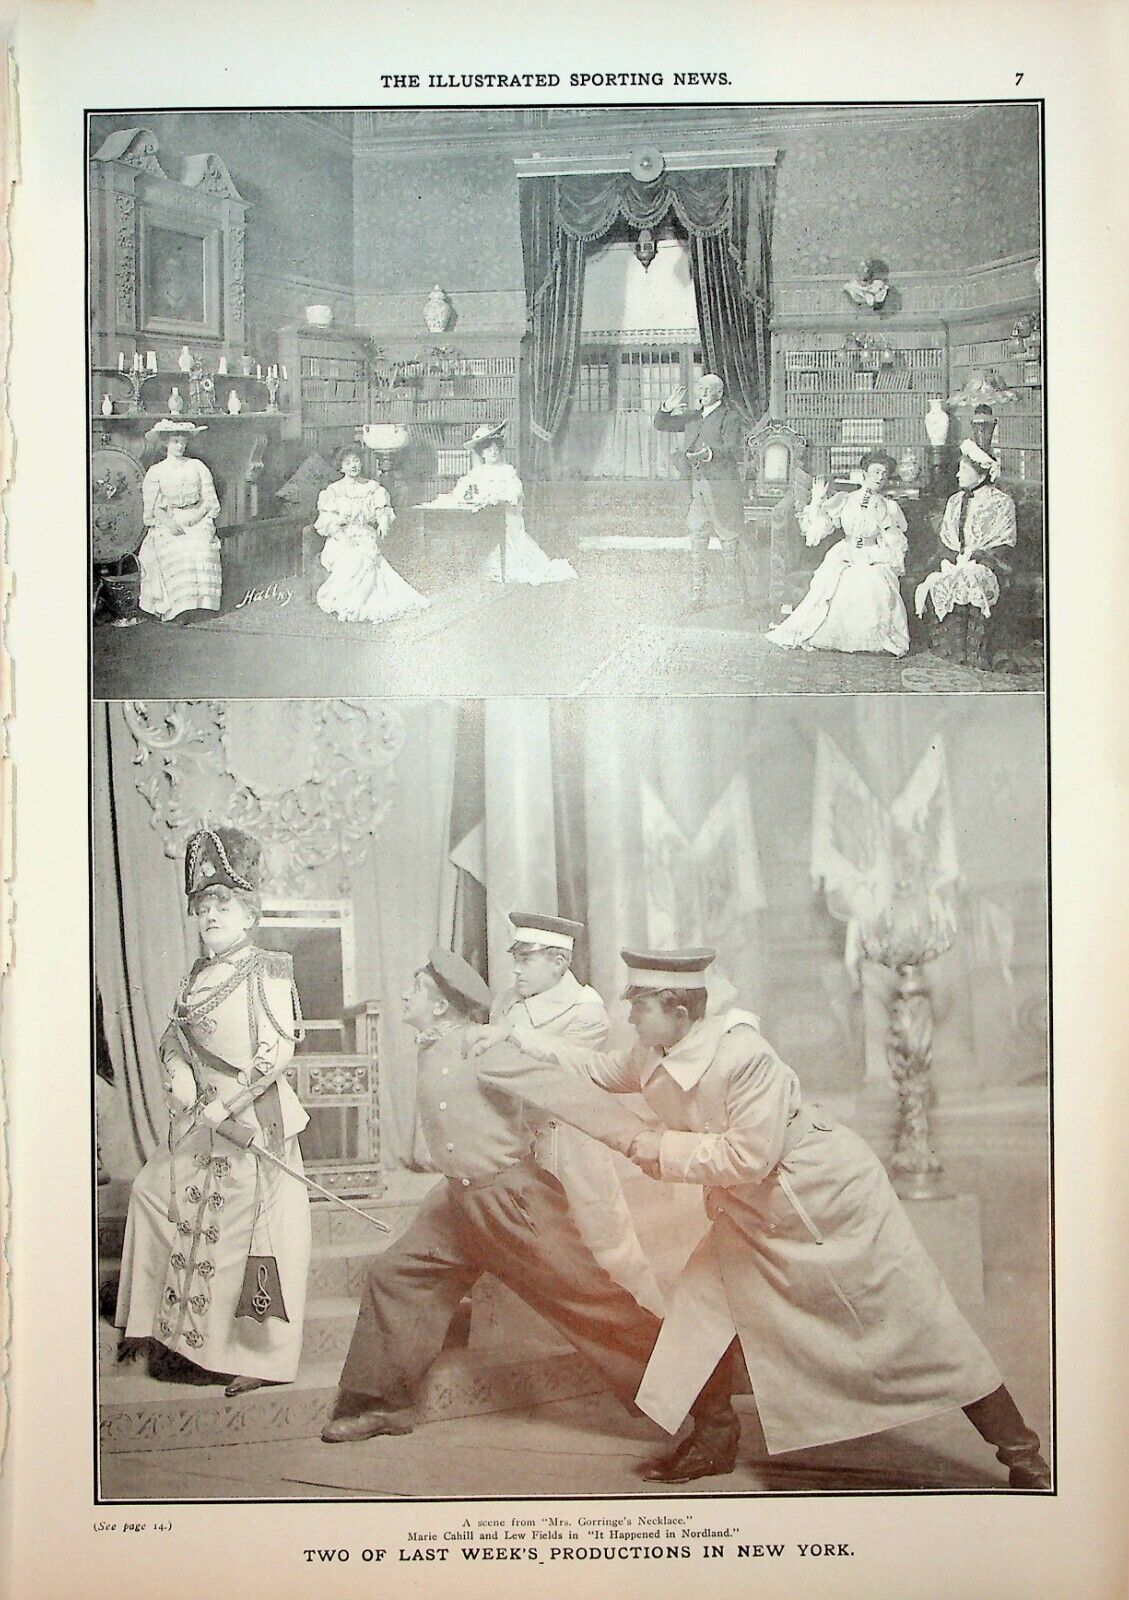 Original Theatrical Productions in New York by Illustrated Sporting News, 1904